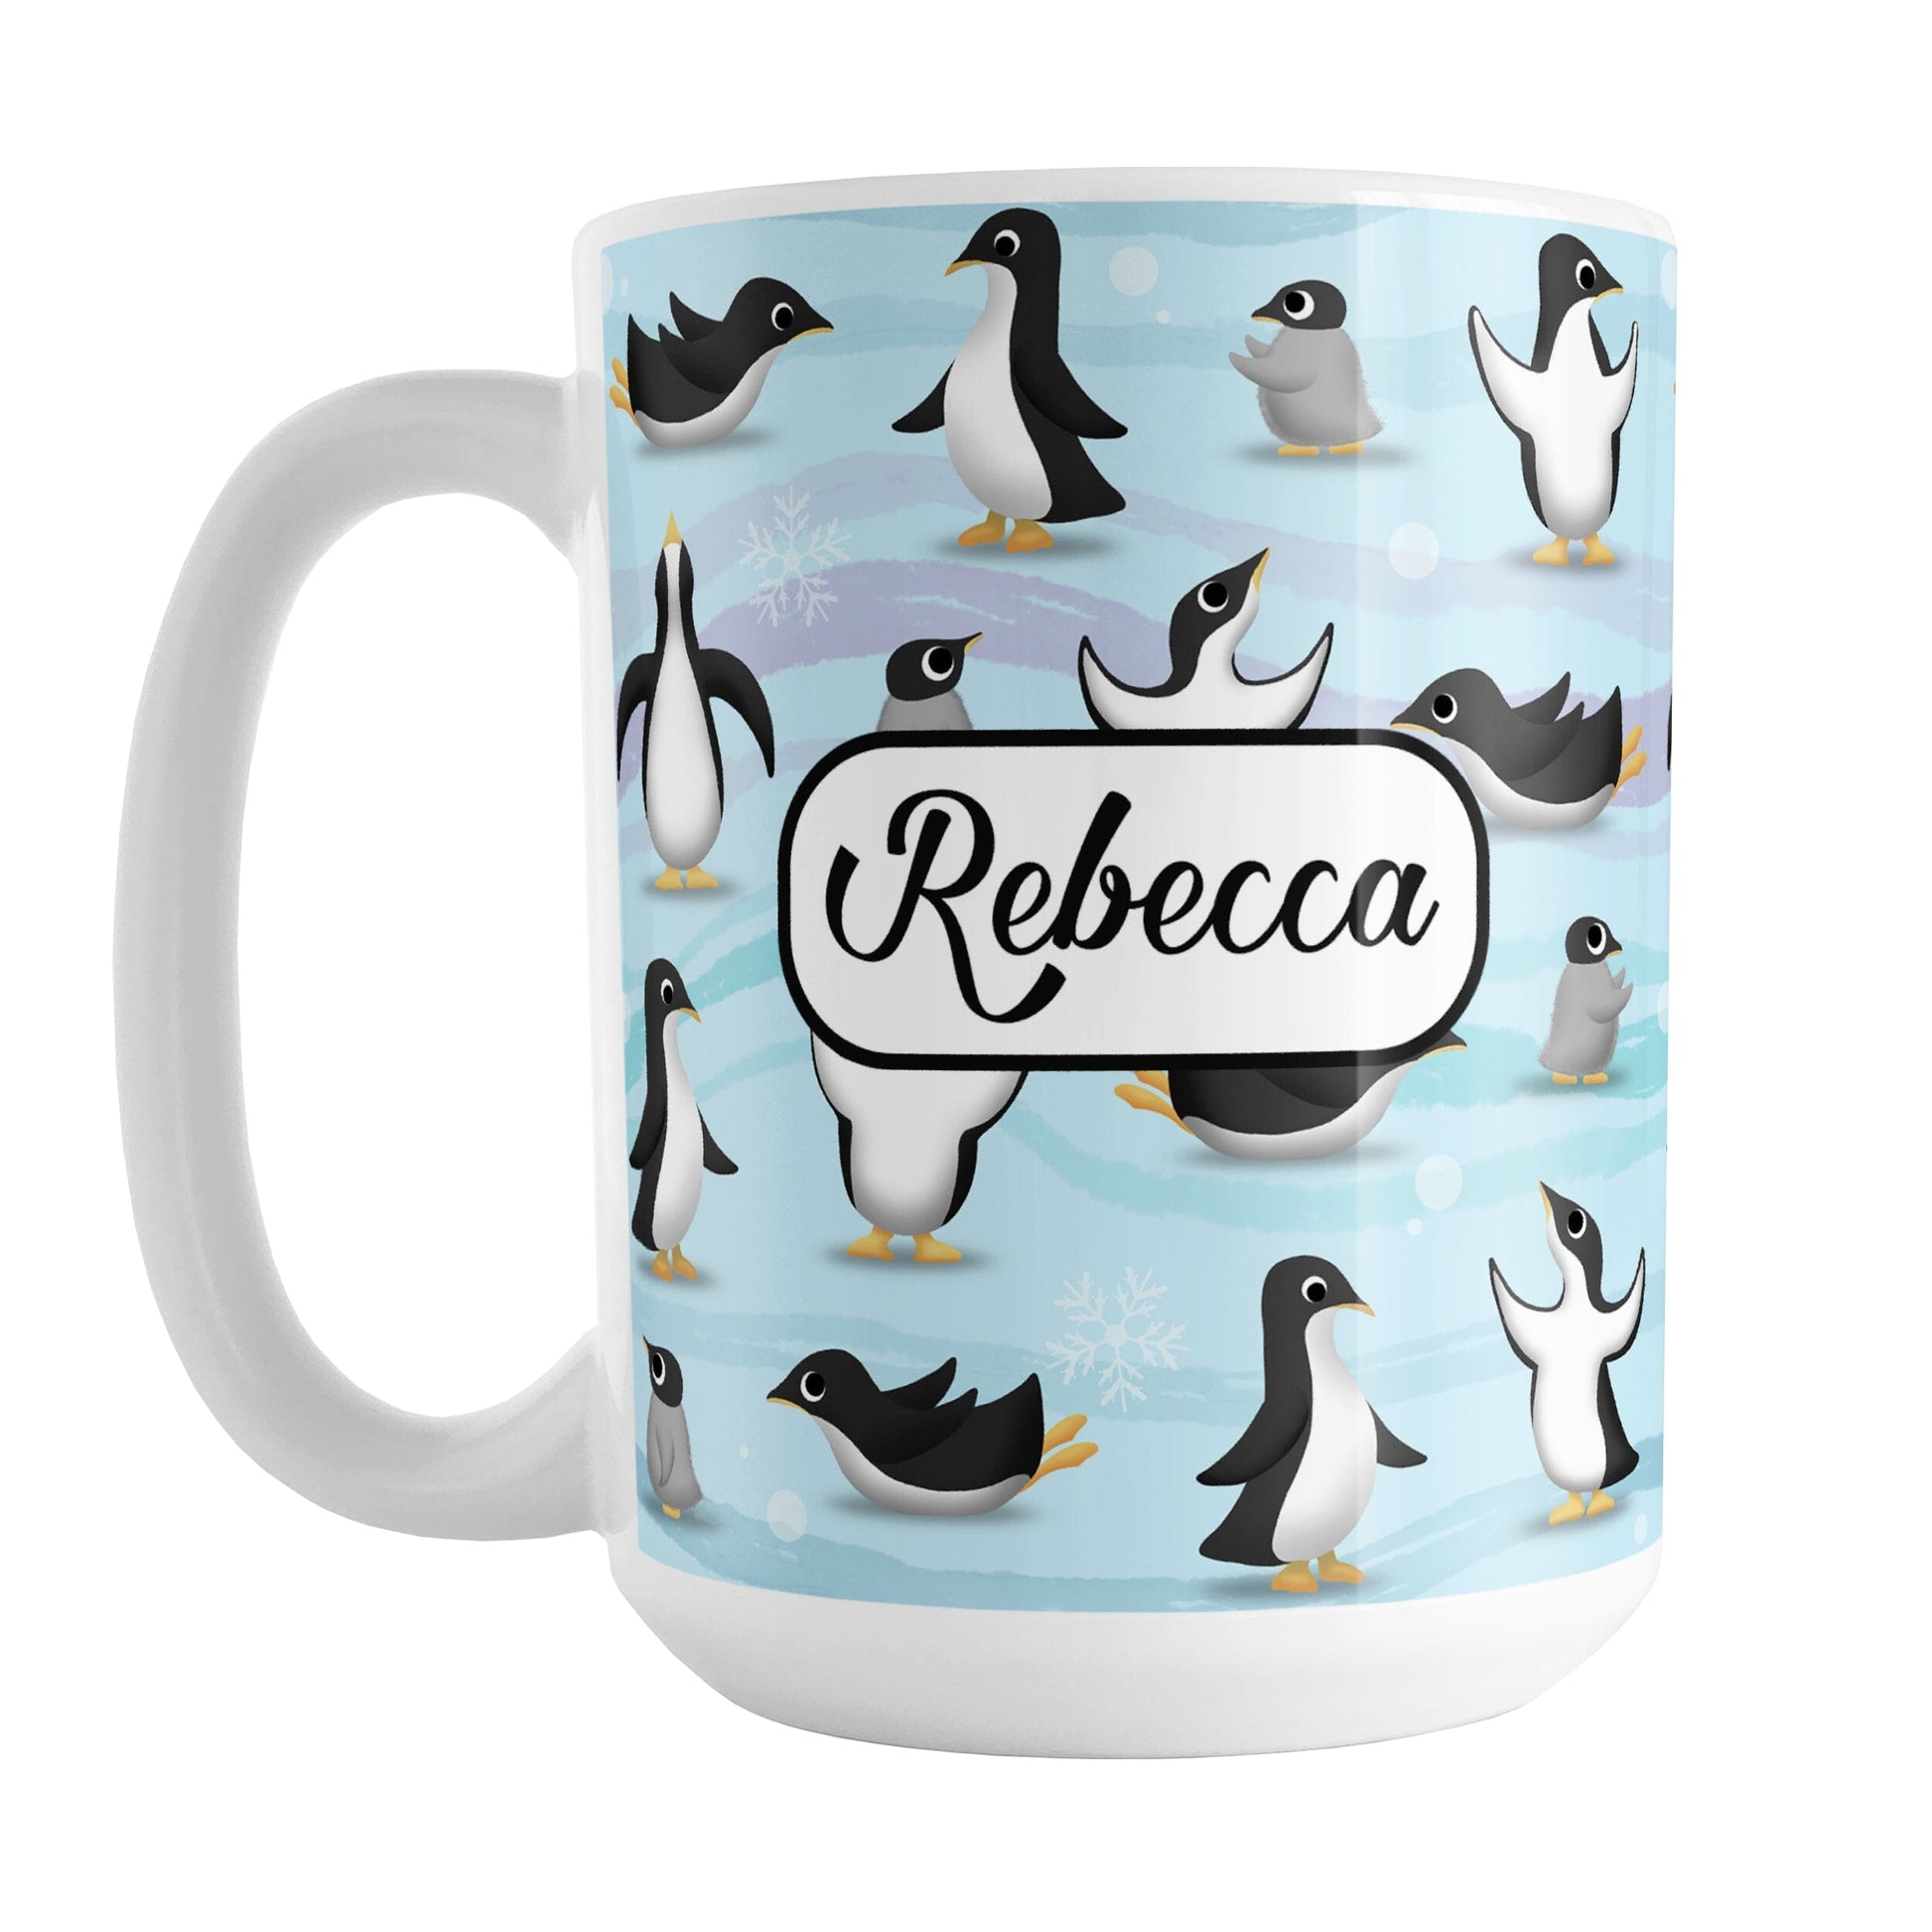 Personalized Penguin Parade Pattern Mug (15oz) at Amy's Coffee Mugs. A ceramic coffee mug designed with a fun penguin parade pattern featuring a variety of penguins and baby penguins over an Antarctic background with waves of blue, turquoise, and purple colors with hints of snowflakes that wraps around the mug. Your name is personalized in a black script font on both sides of the mug over the cute penguin pattern.